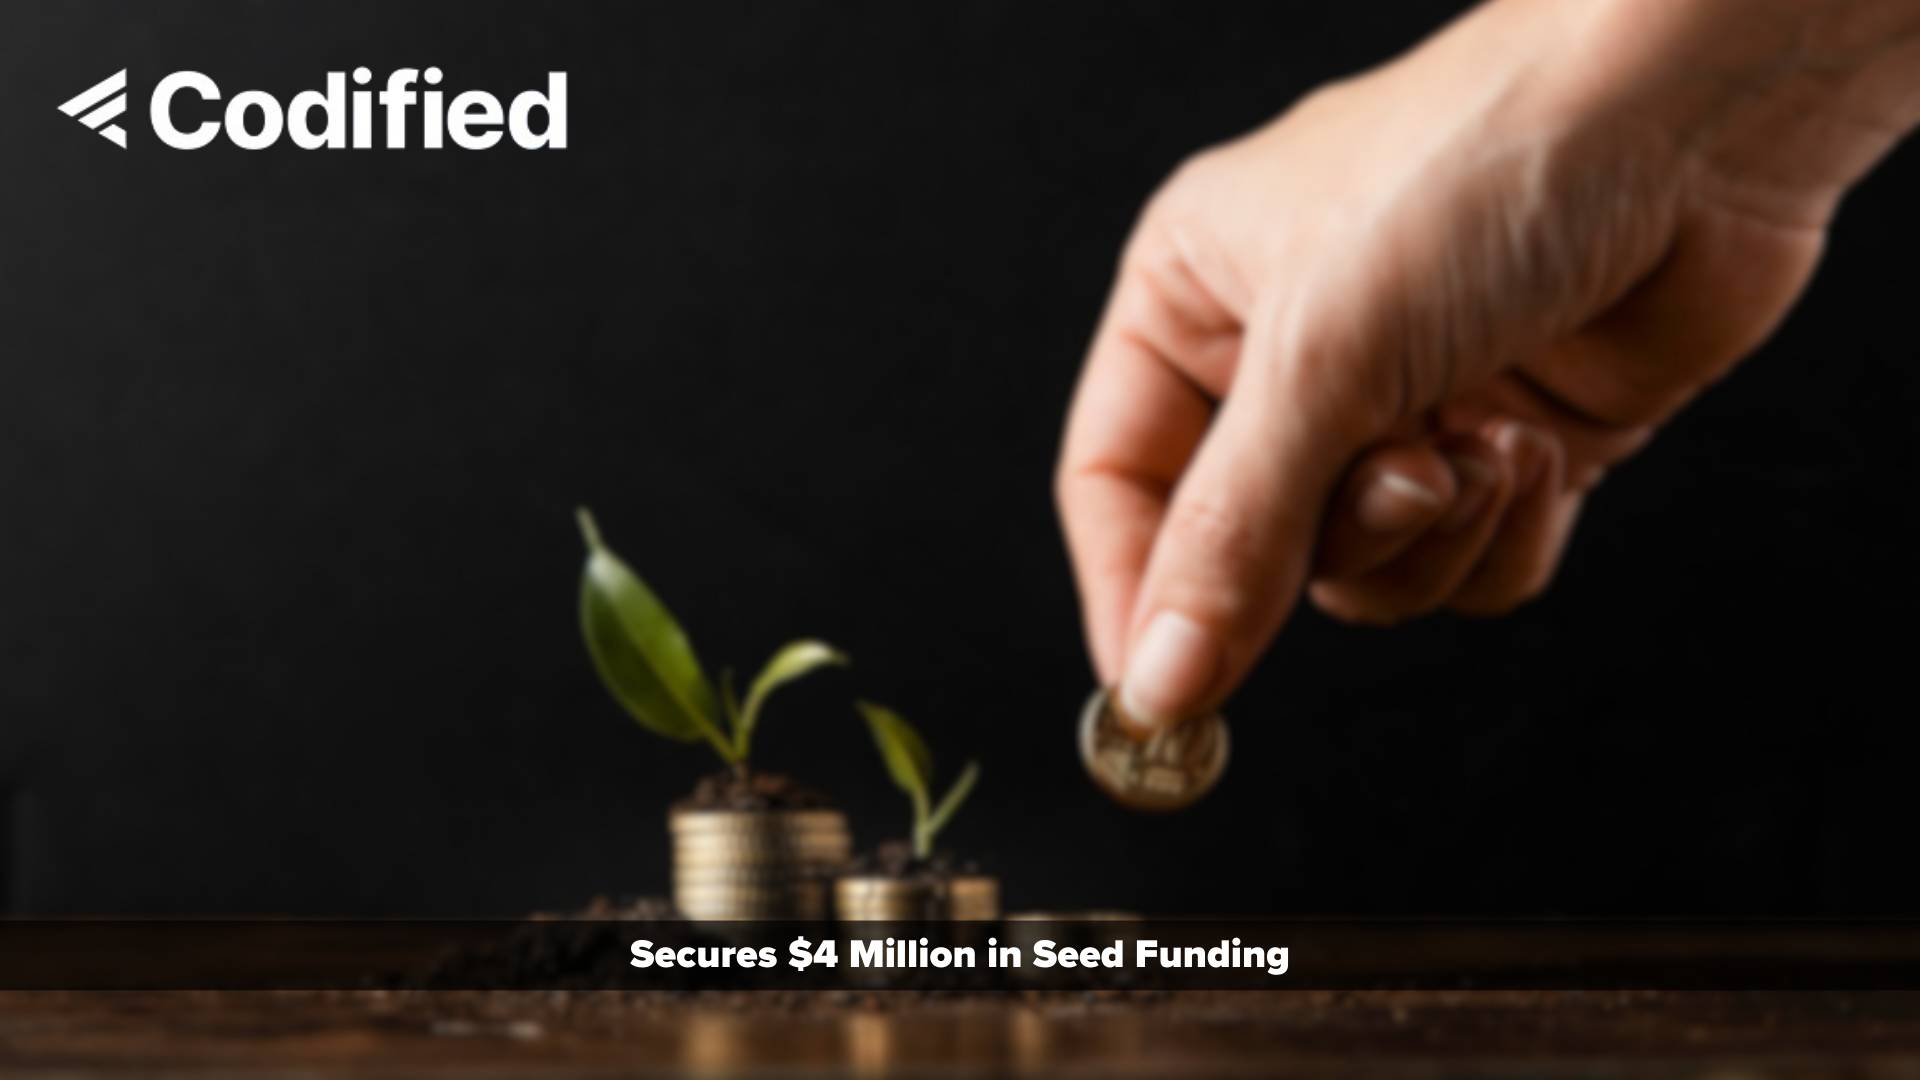 Codified Secures $4 Million in Seed Funding to Modernize Data Governance